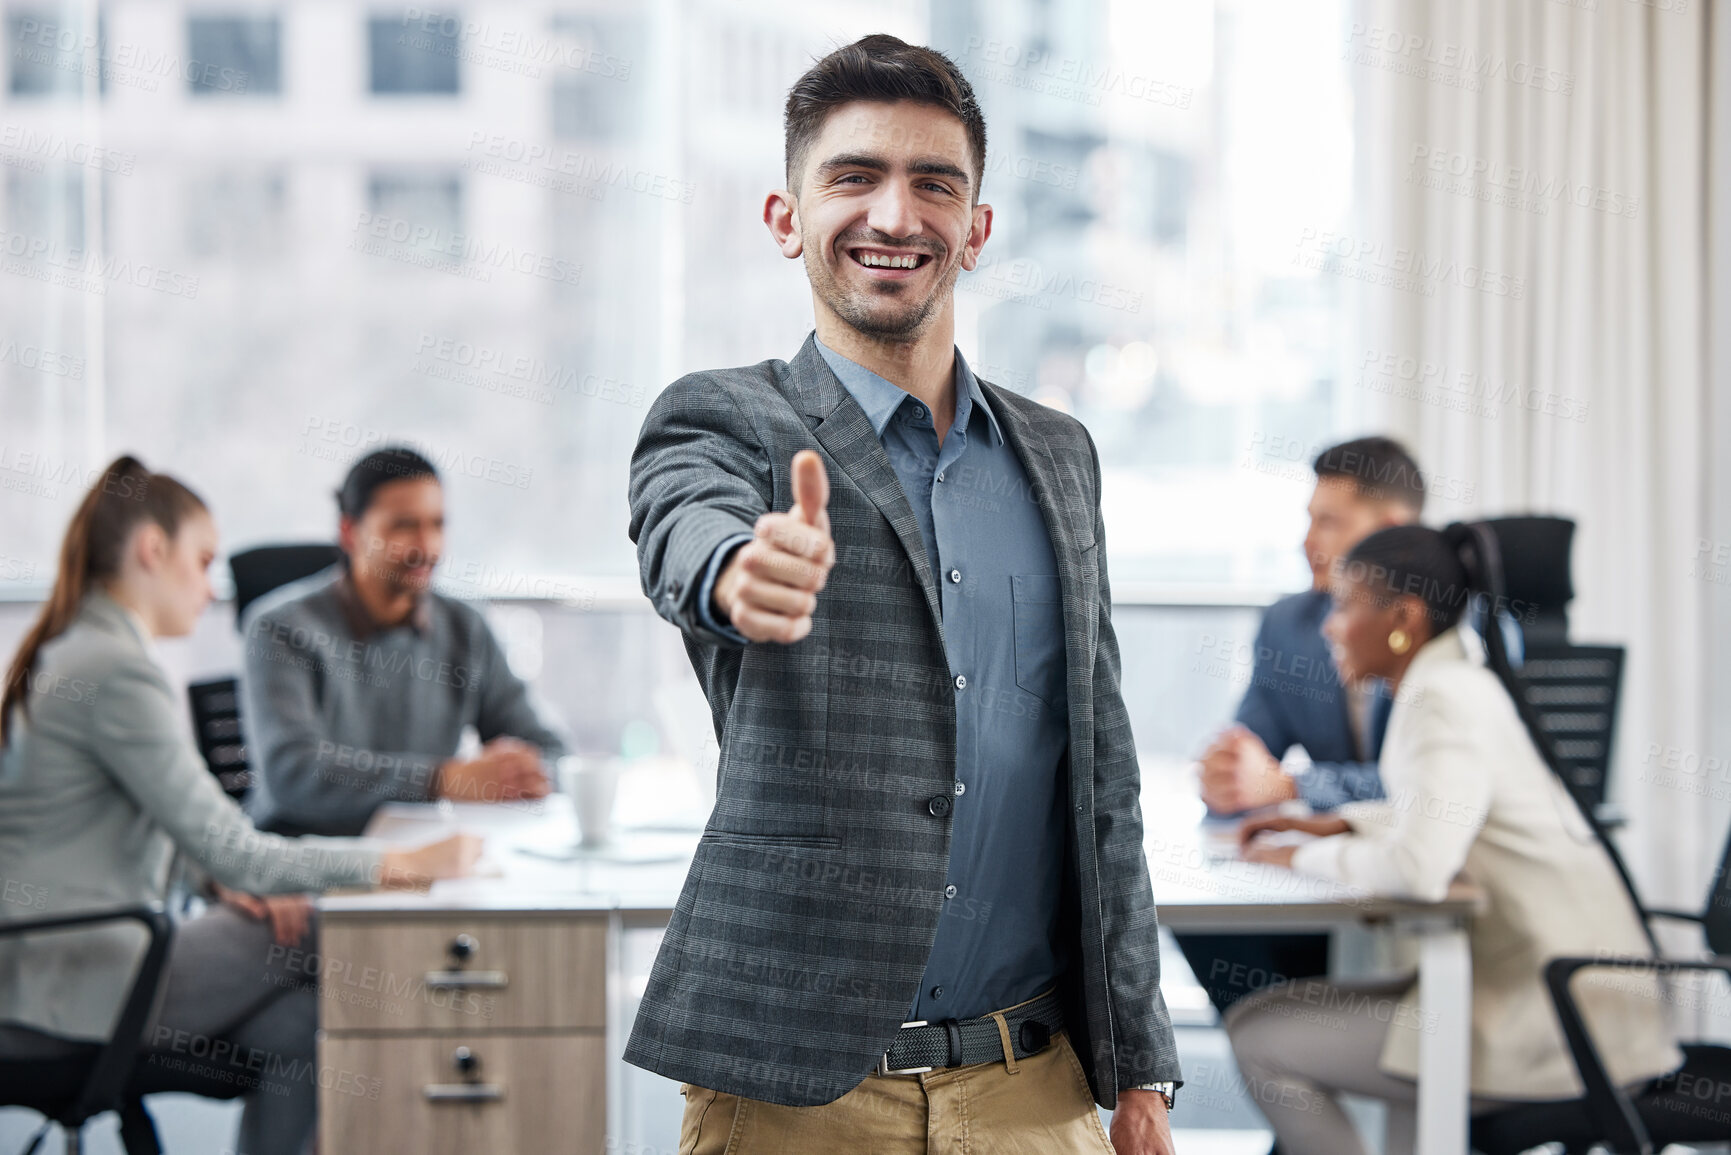 Buy stock photo Shot of a young businessman showing a thumbs up while in a meeting at work